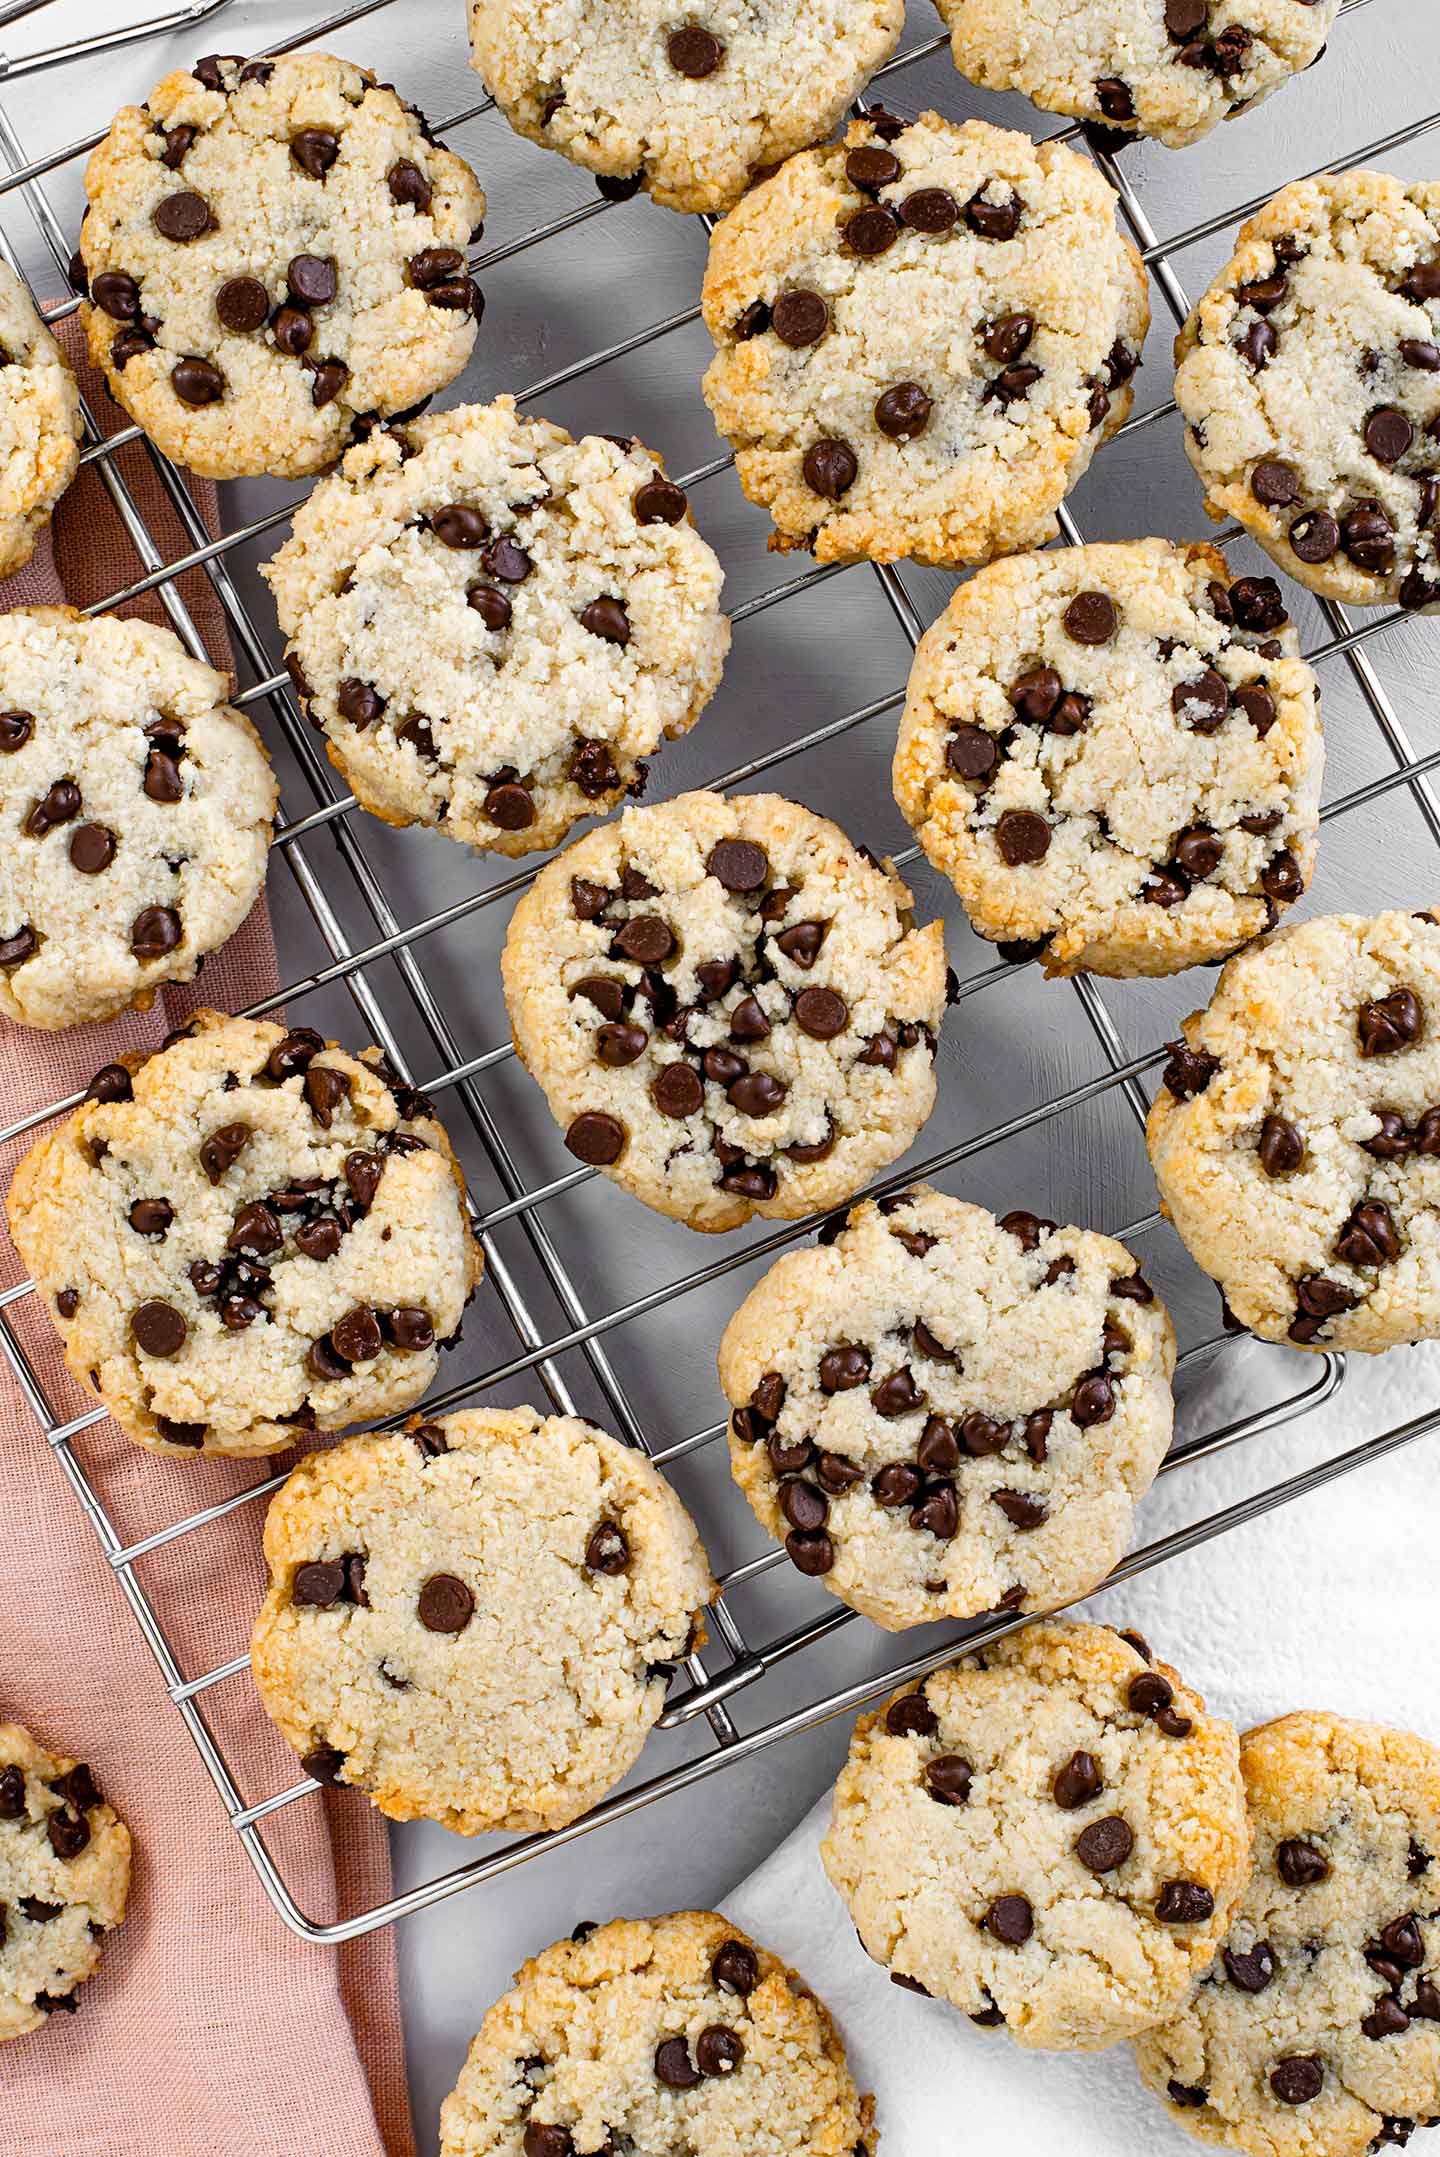 Top down view of fresh baked cookies on a drying rack, loaded with chocolate chips and golden around the edges.